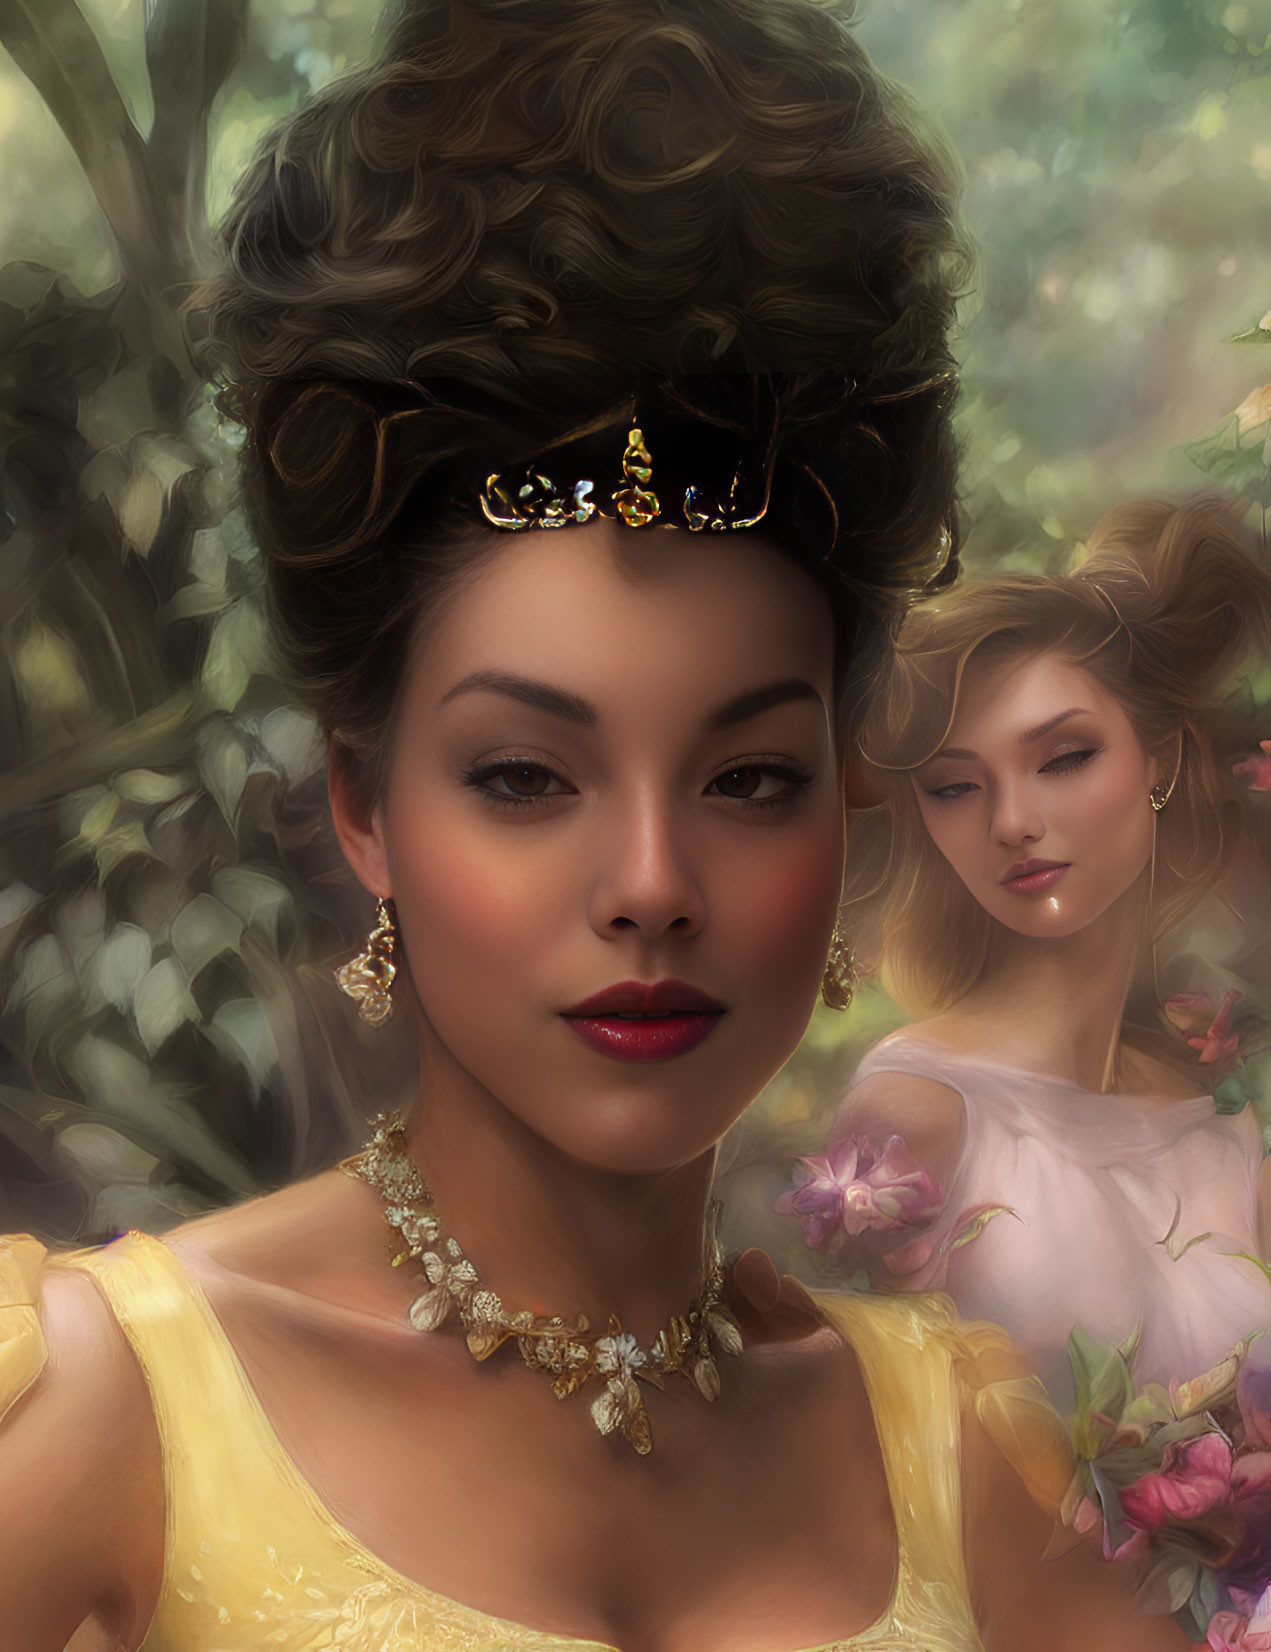 Portrait of two women: one with ornate crown and yellow dress, another blurred amidst flowers.